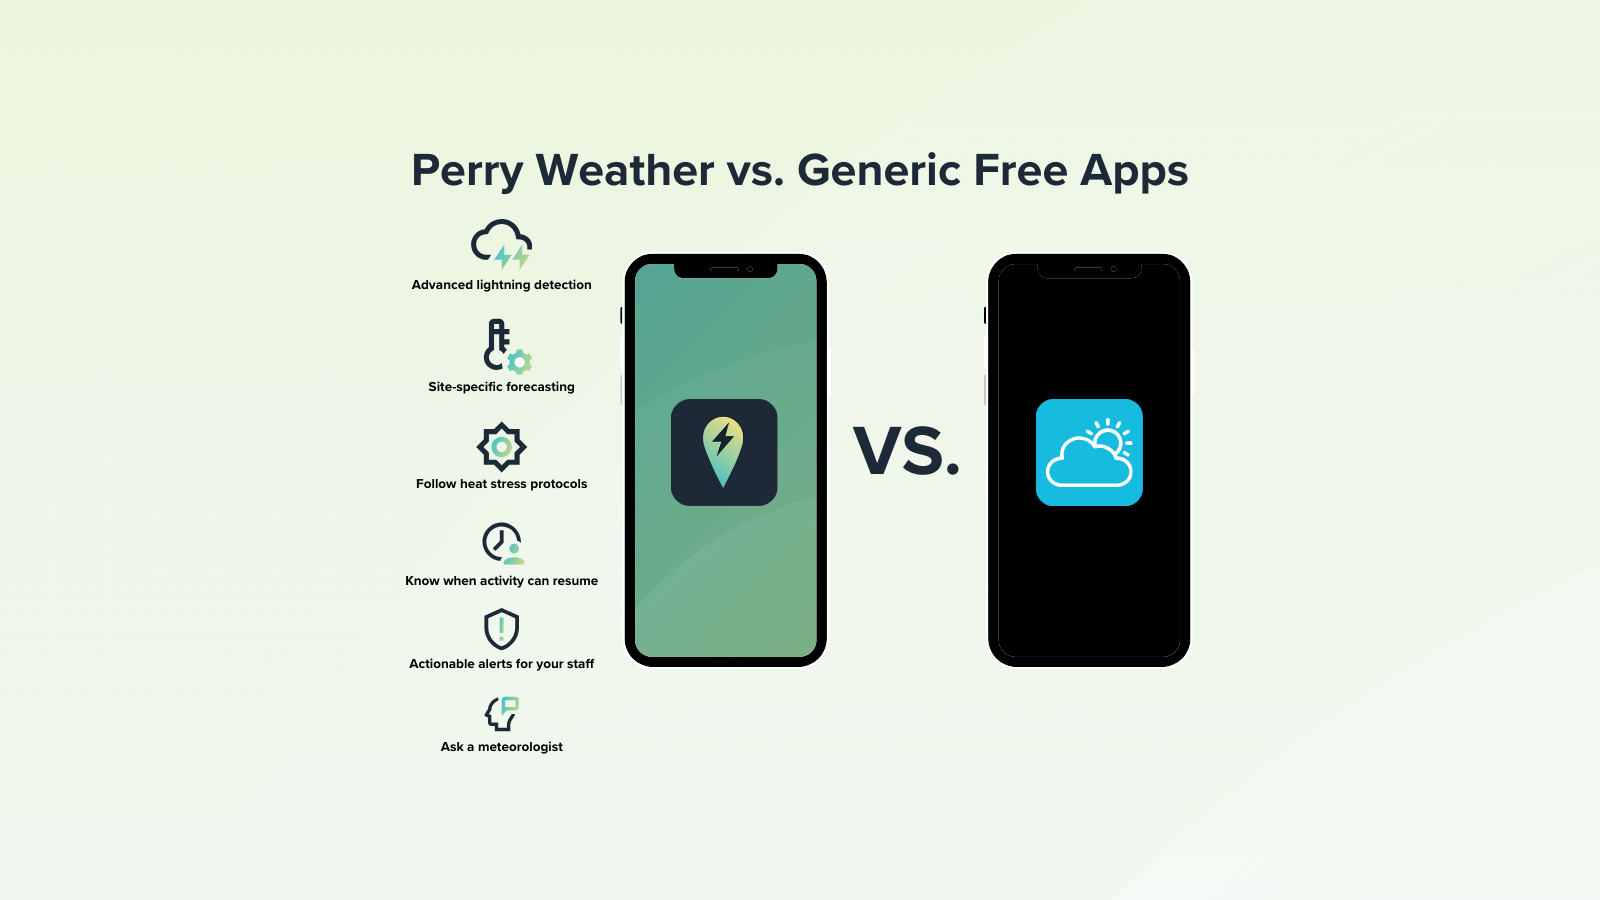 Why organizations choose Perry Weather over basic free weather apps